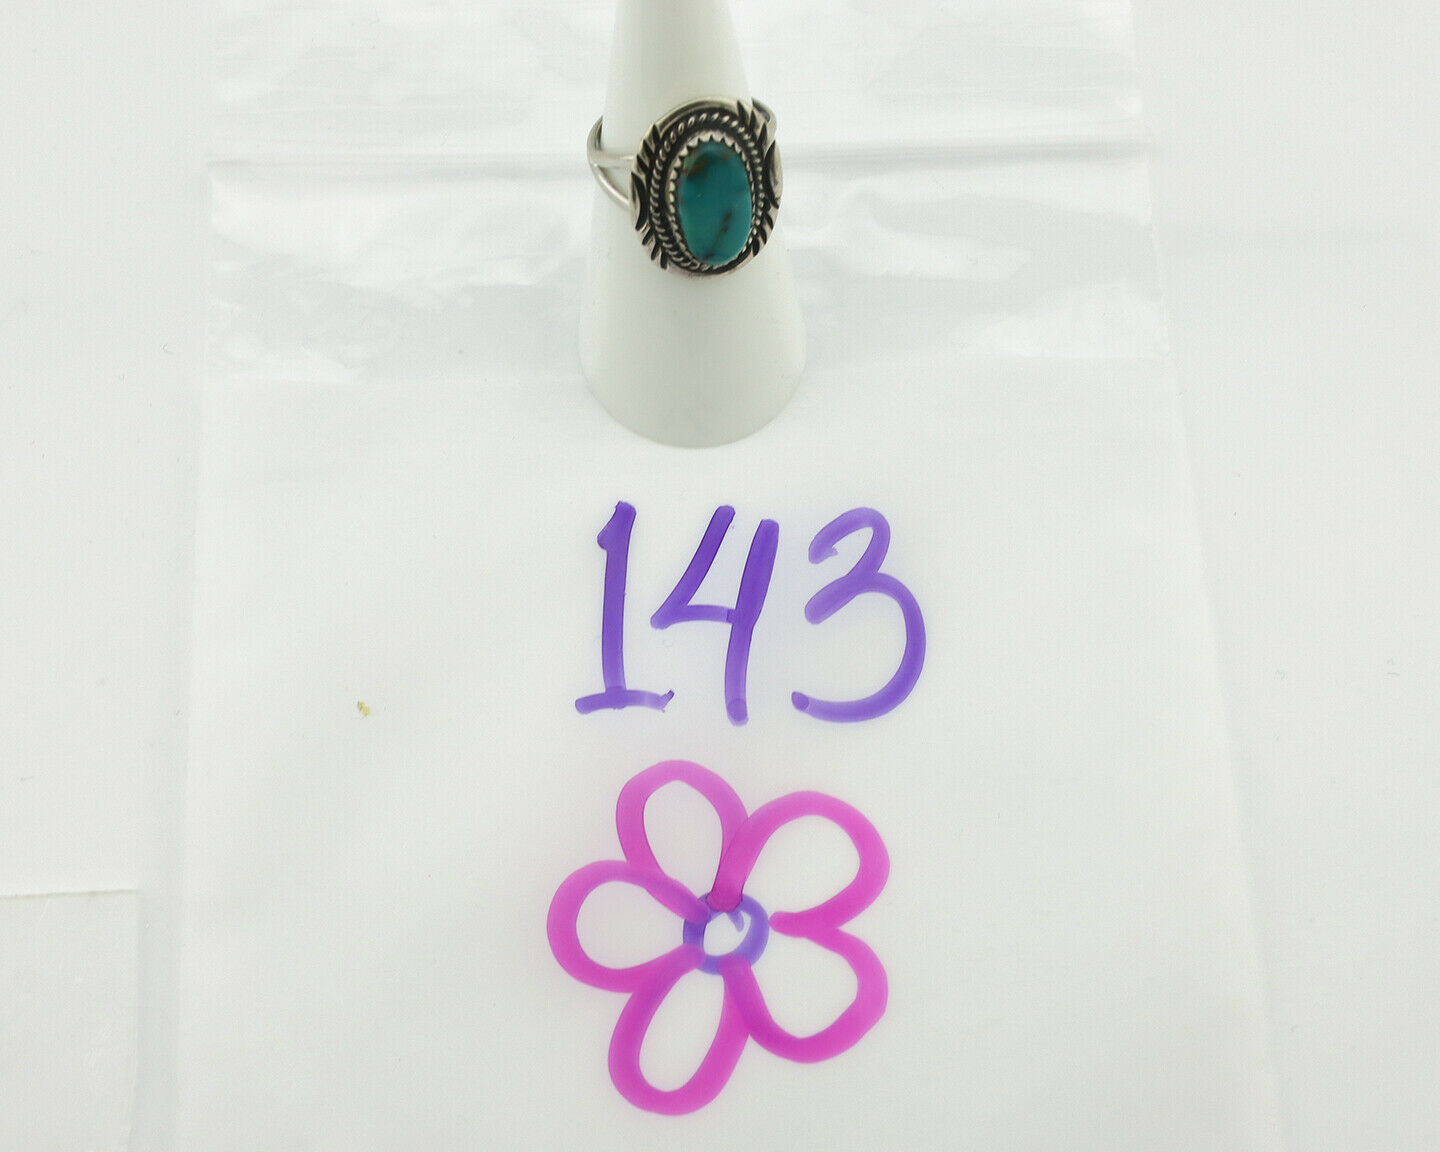 Navajo Ring .925 Silver Natural Turquoise Native American Artist C.1980's